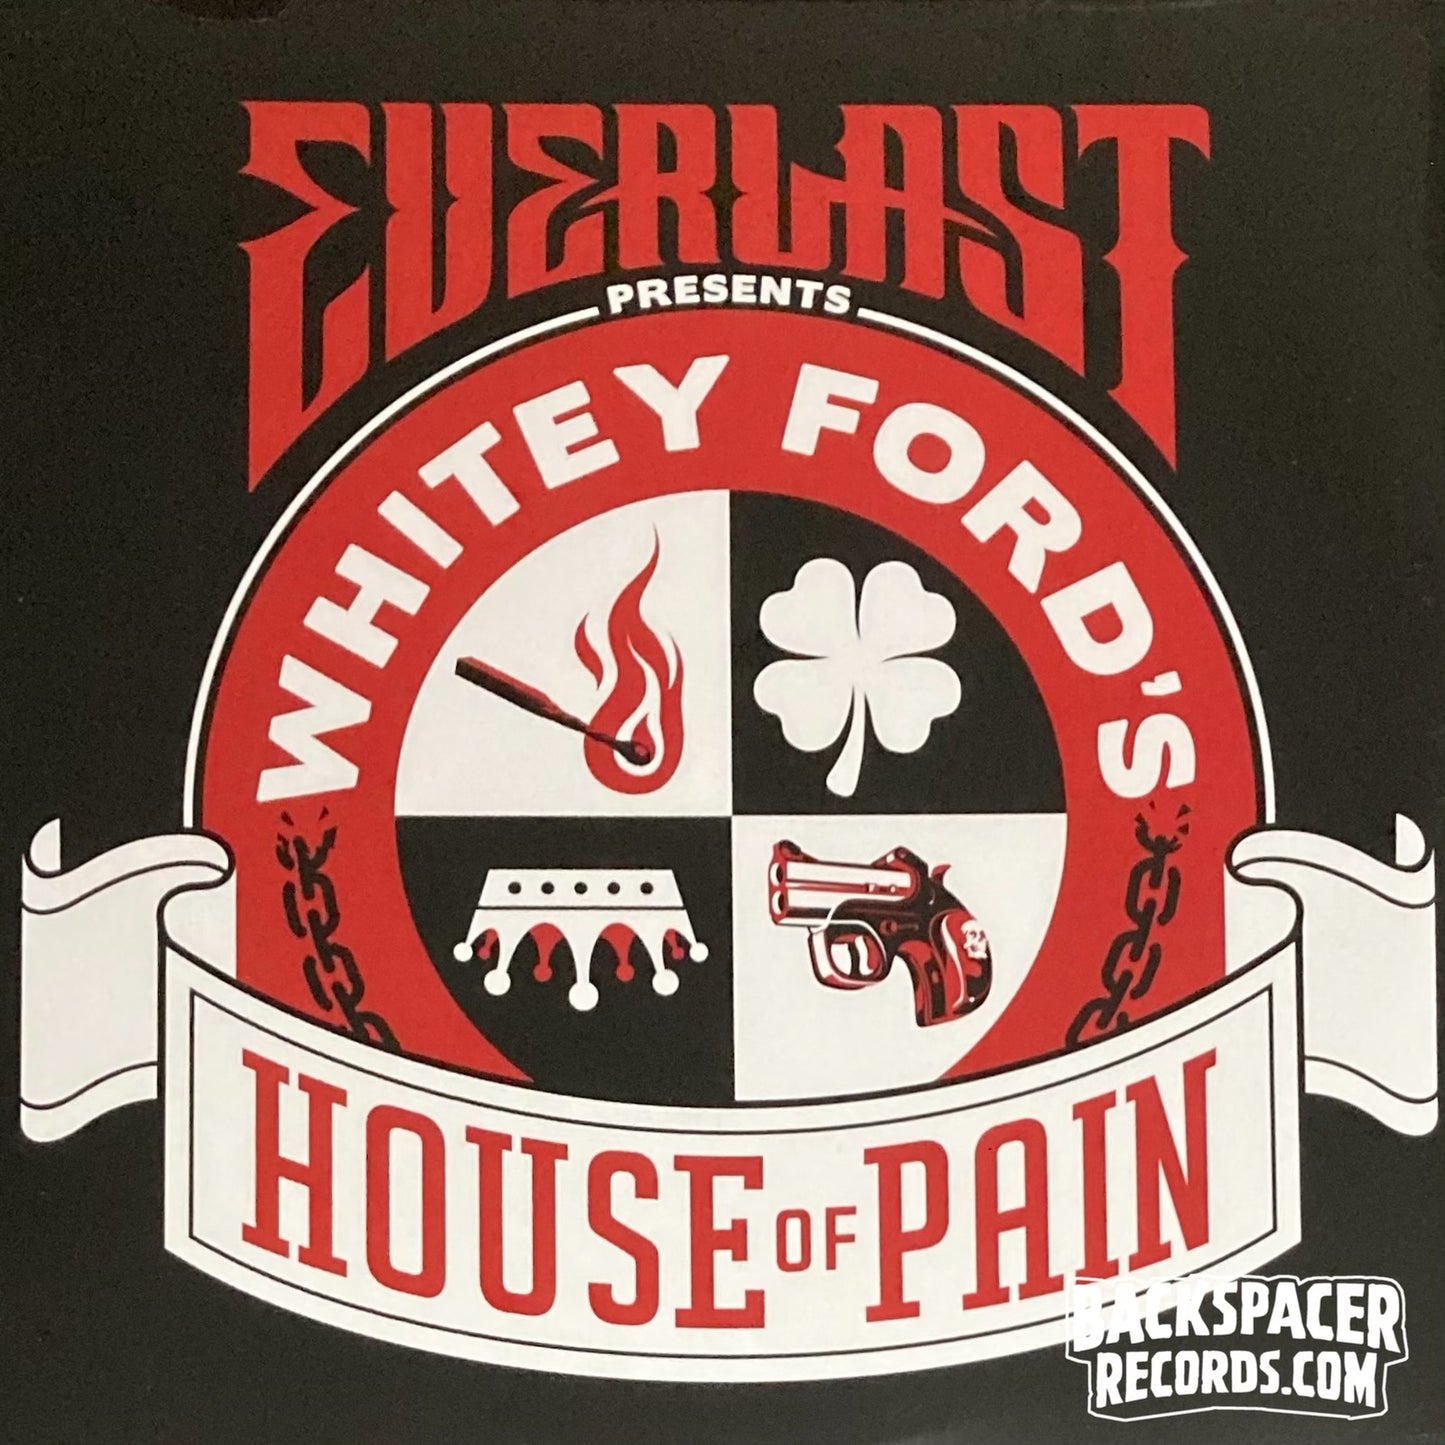 Everlast ‎– Whitey Ford's House Of Pain 2-LP + CD (Sealed)